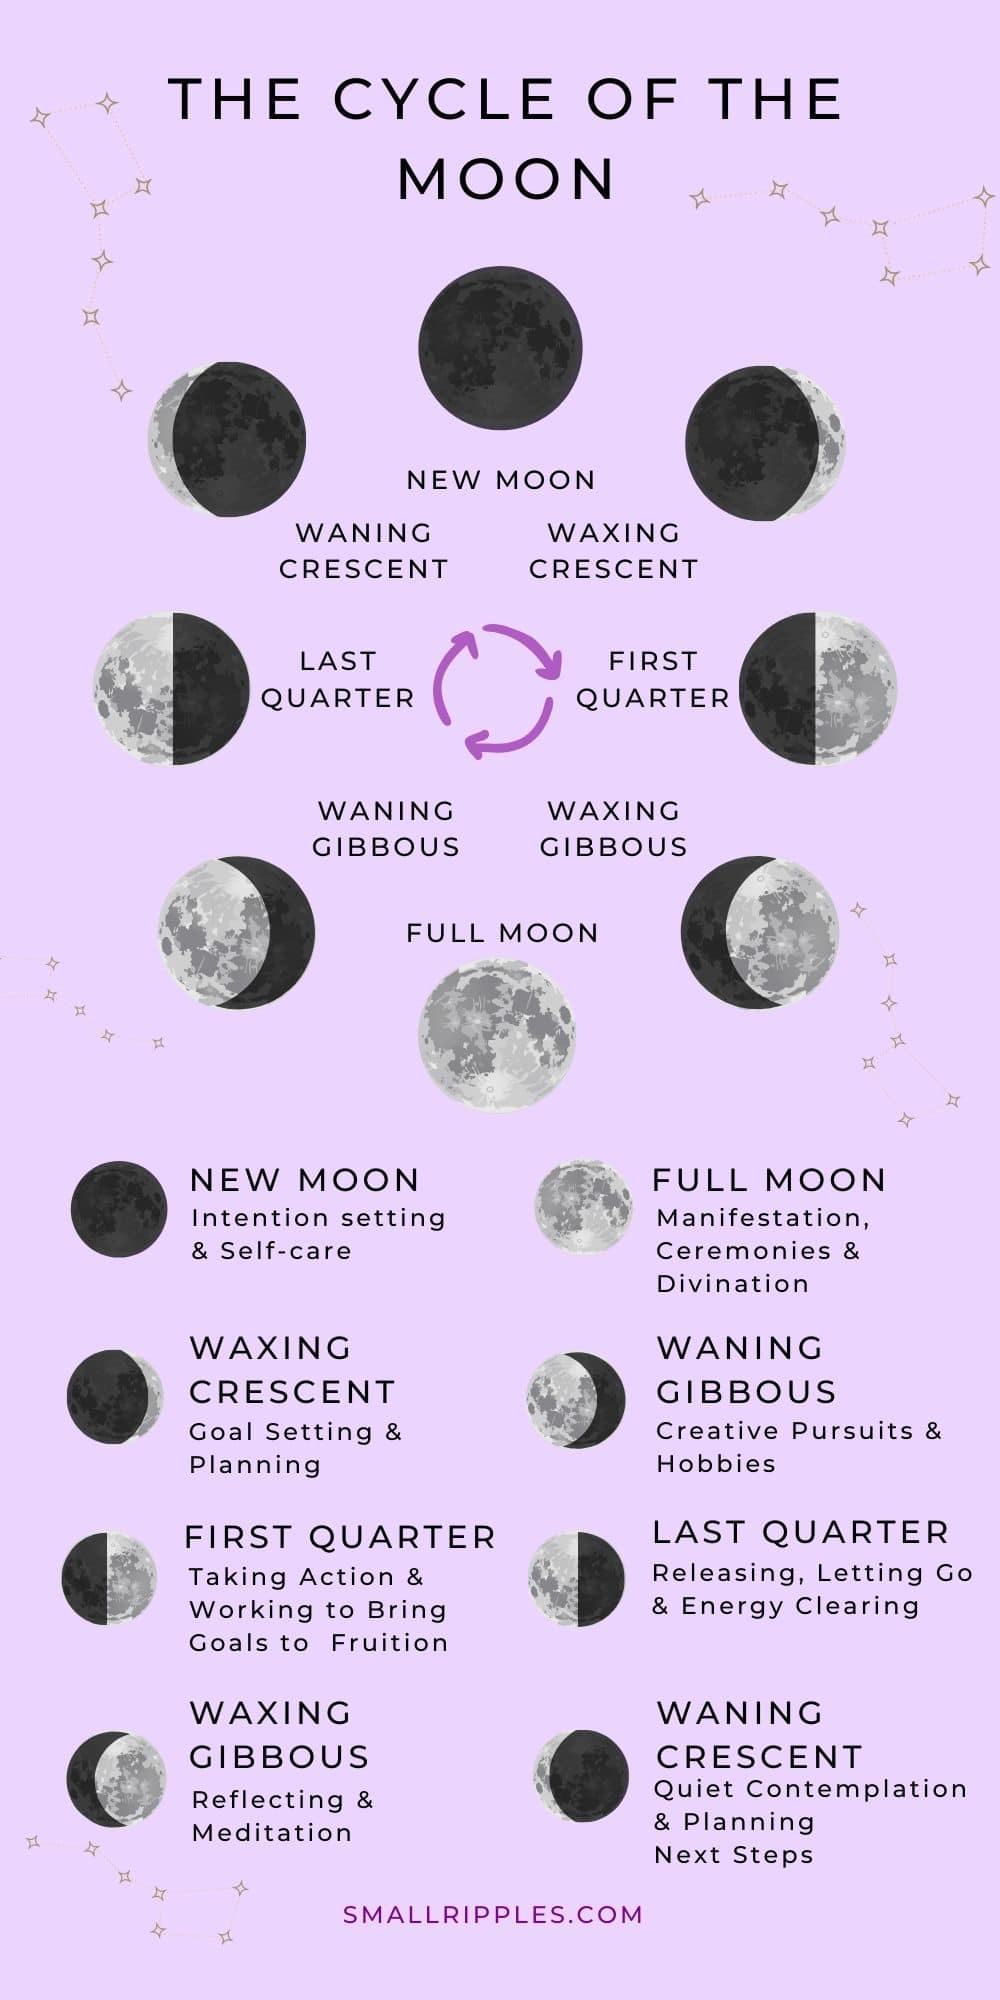 Moon Phases / Lunar Phases Explained